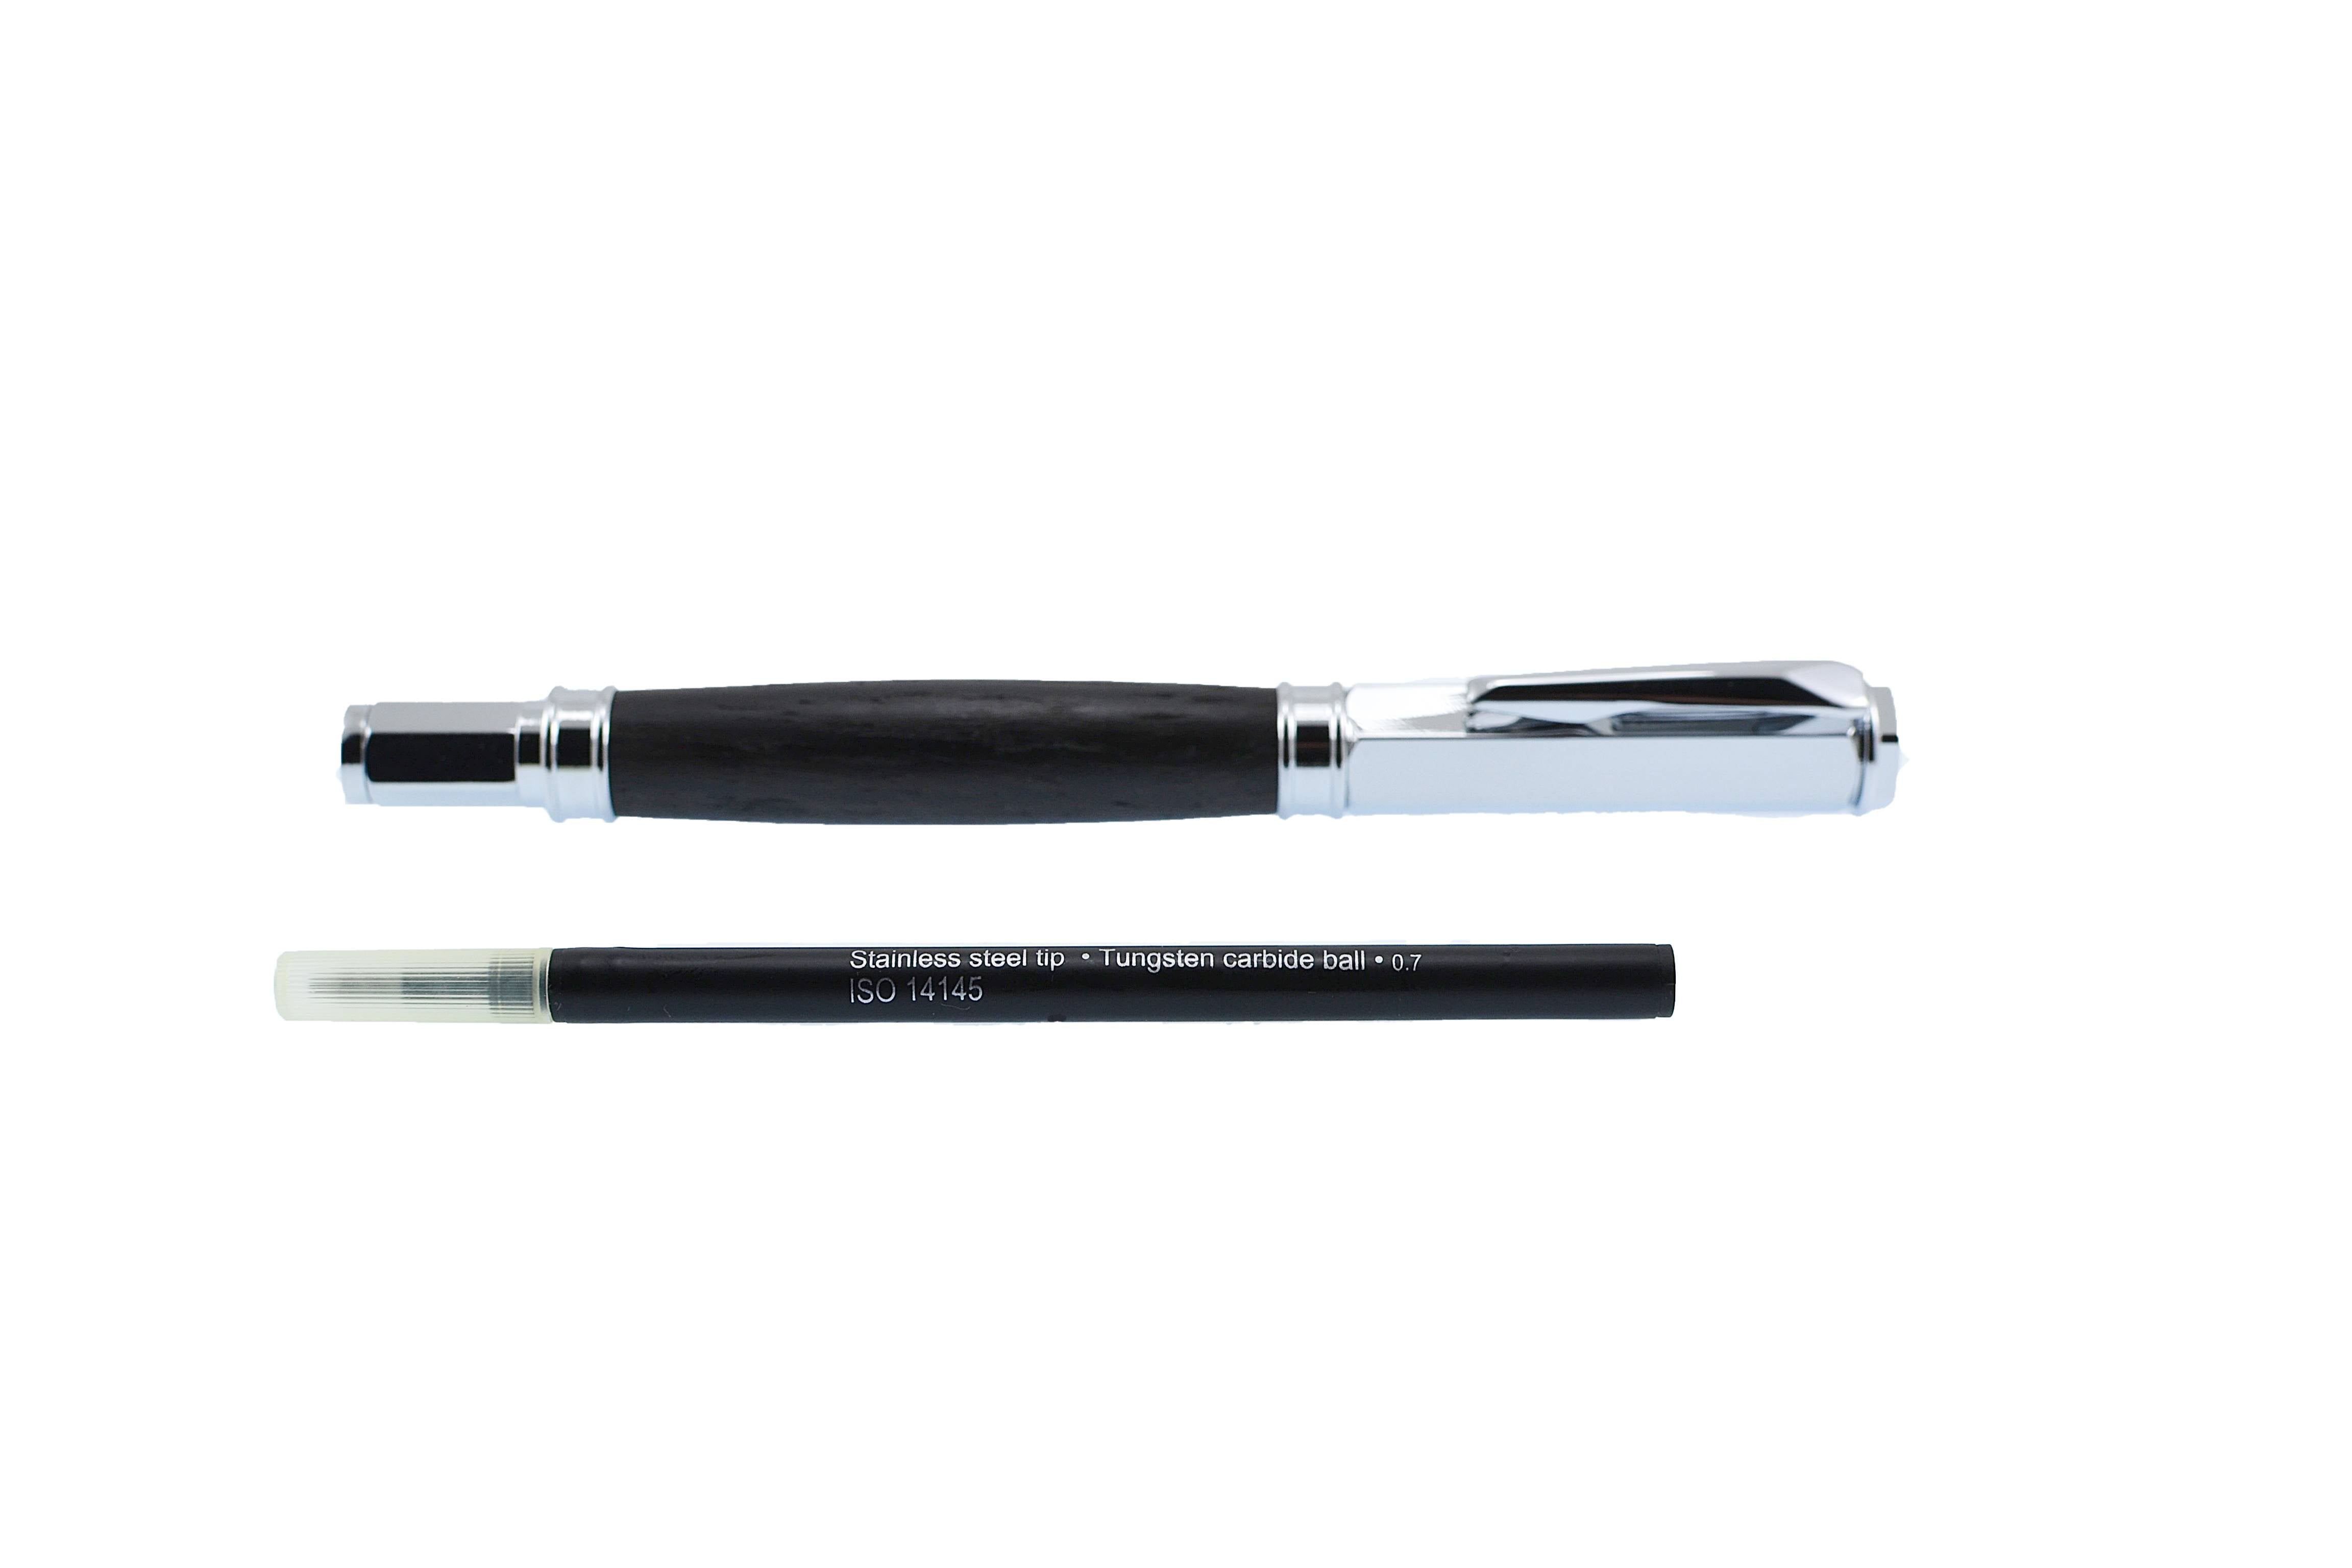 Gravity magnetic rollerball